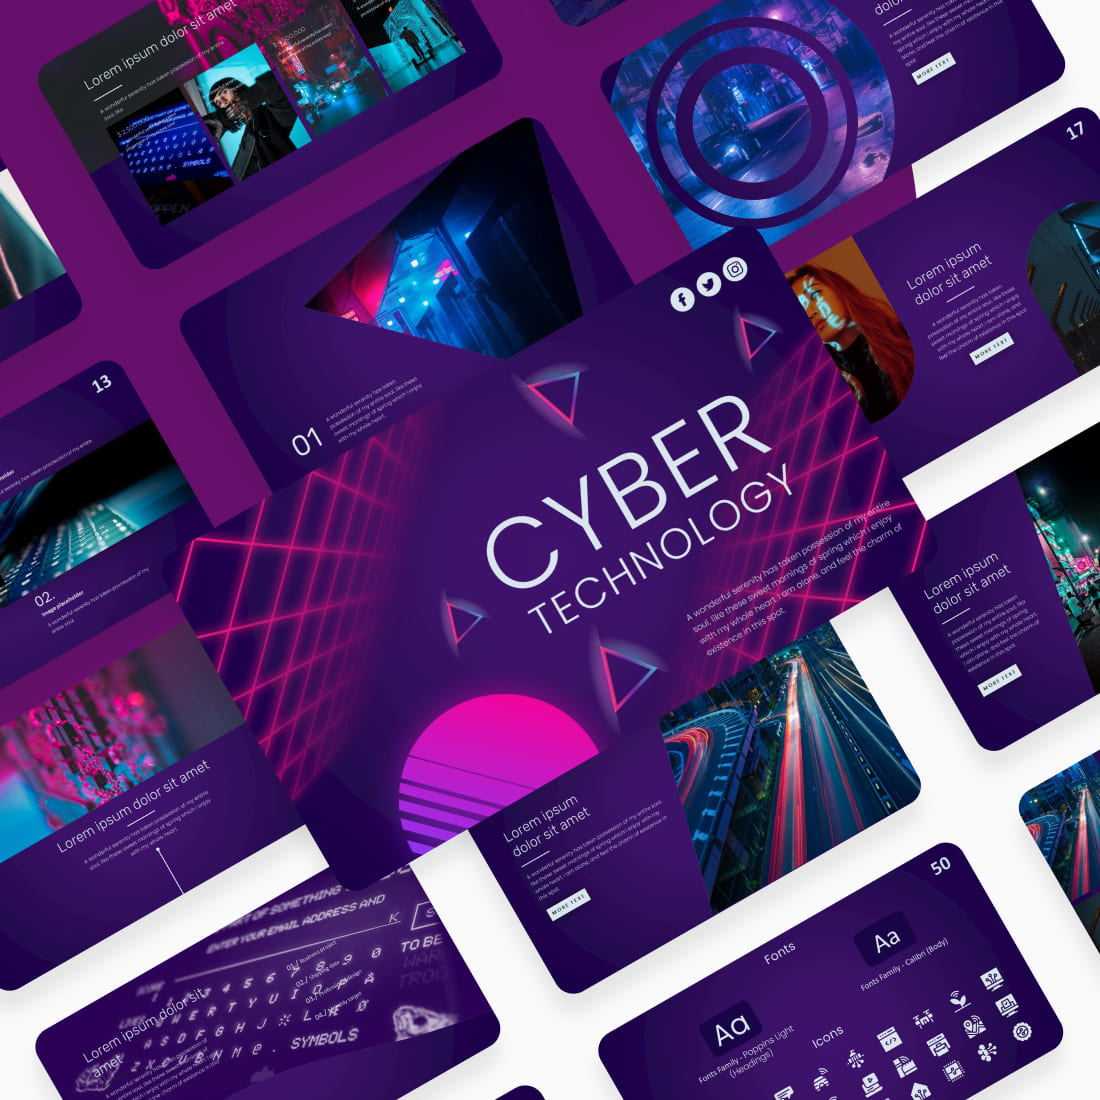 Cyber Technology Google Slides Theme cover image.